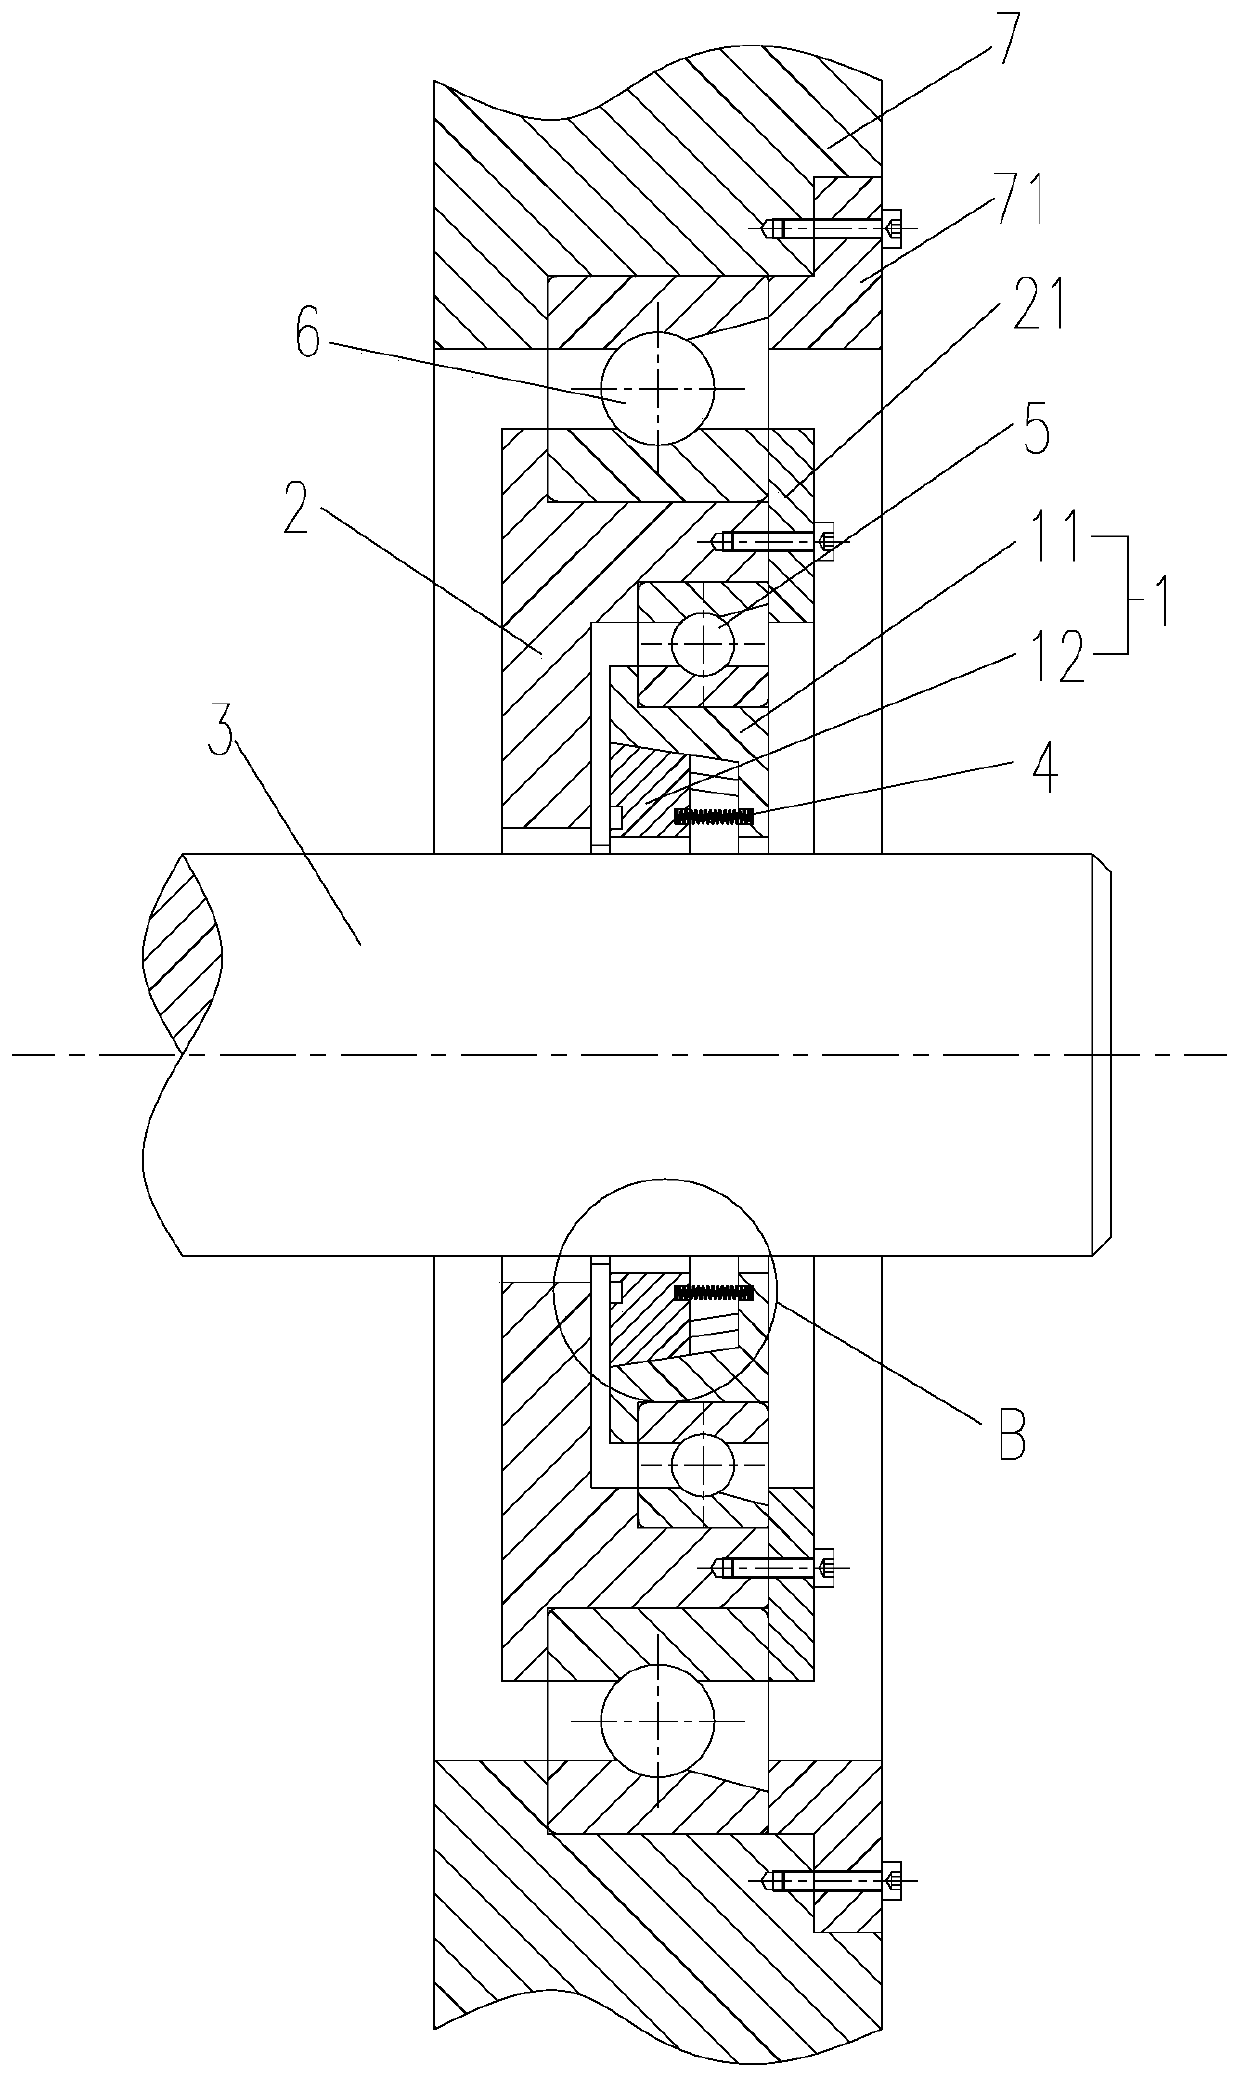 Protective bearing device with sliding blocks for eliminating clearance